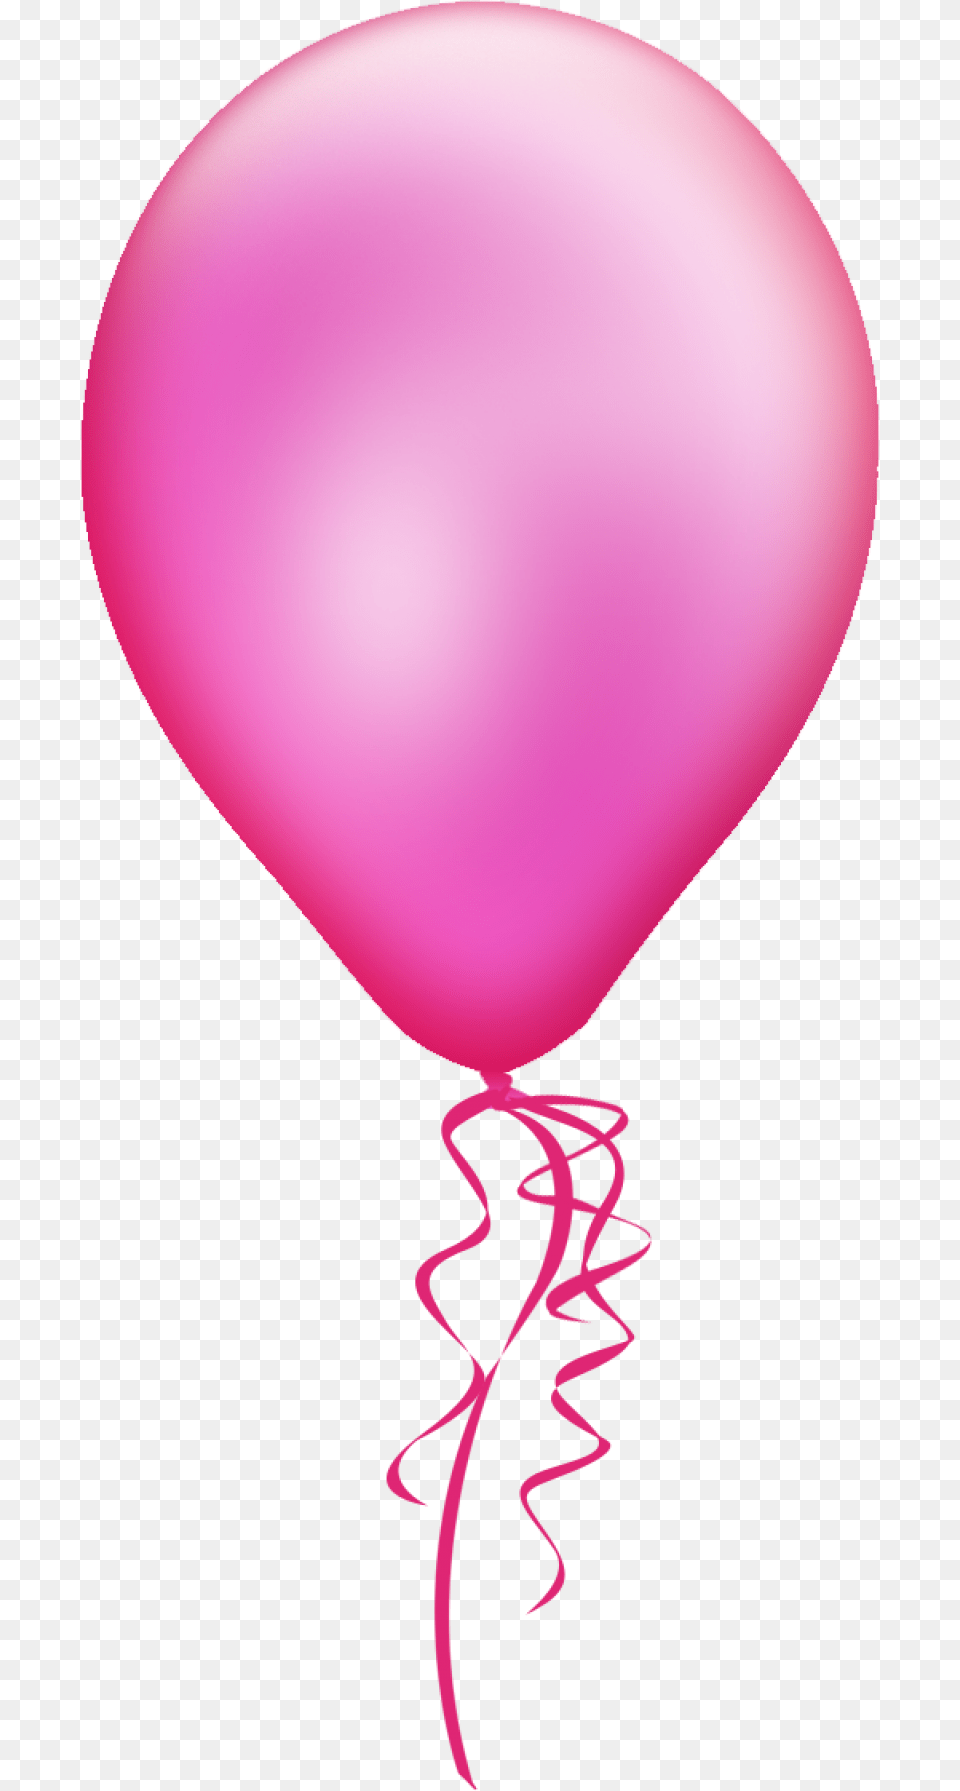 Balloon Images Picture Pink Balloon Transparent Background Free Png